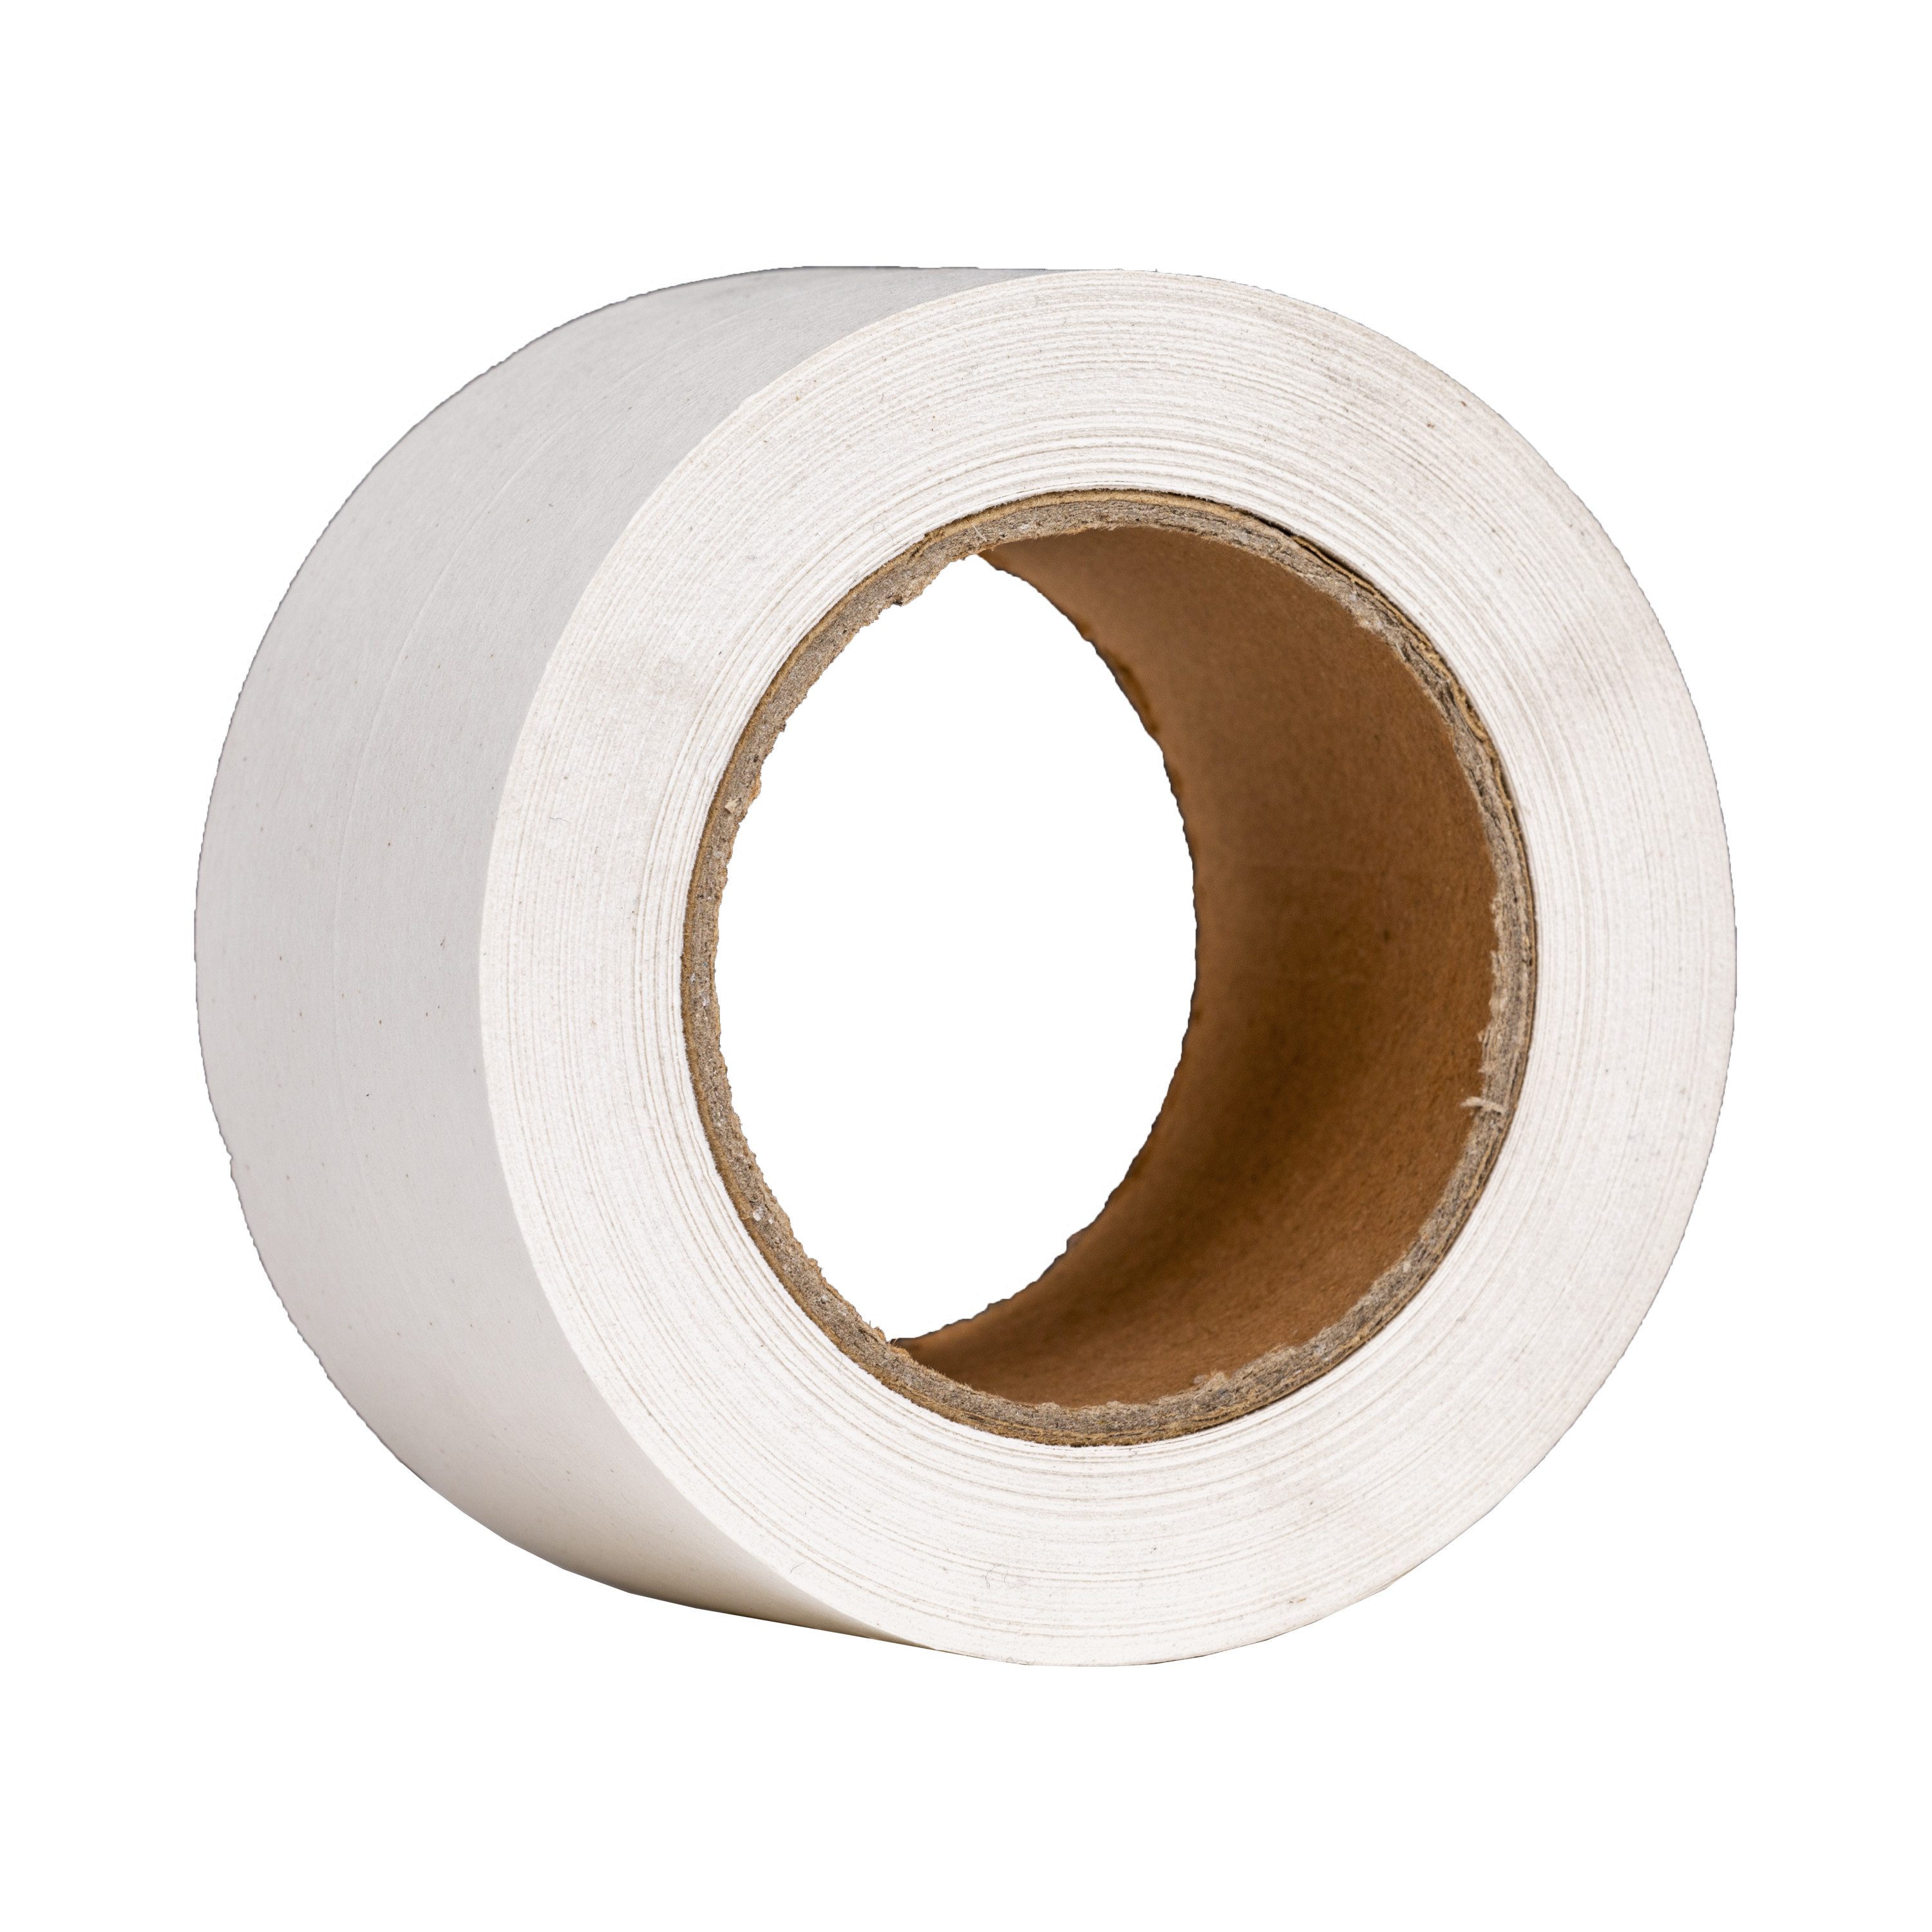 Duck Drywall All Purpose Joint Paper Tape, 2.06 in. x 75 ft., White - image 3 of 10